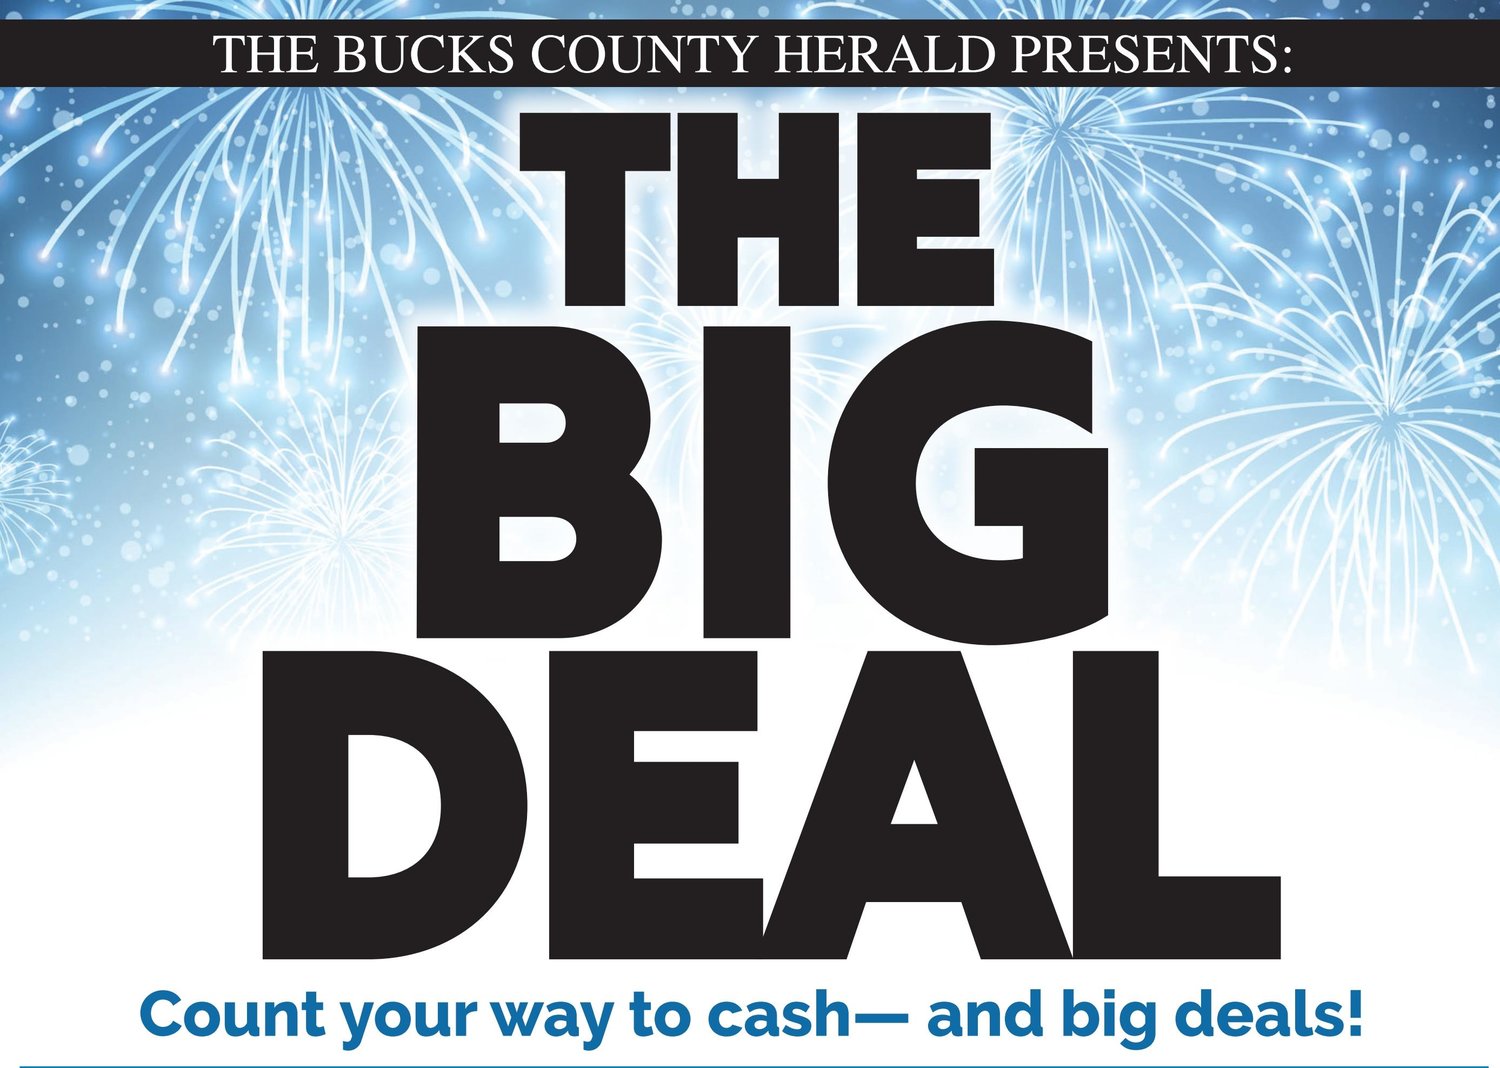 The Big Deal, a Bucks County Herald Reader Contest